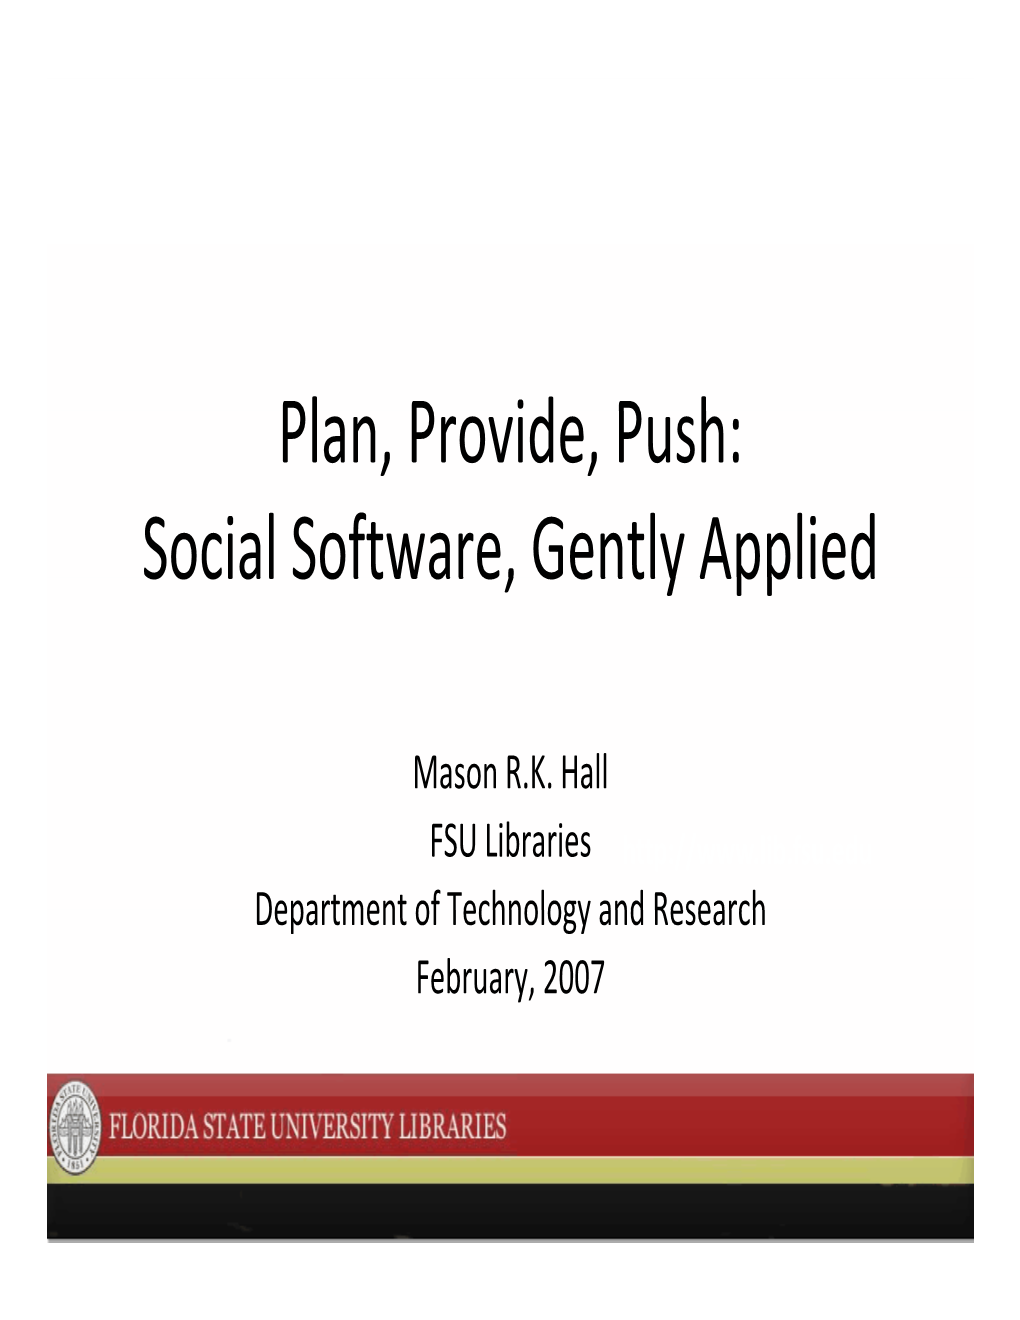 Pl P Id P H An, Provide, Push: Social Software, Gently